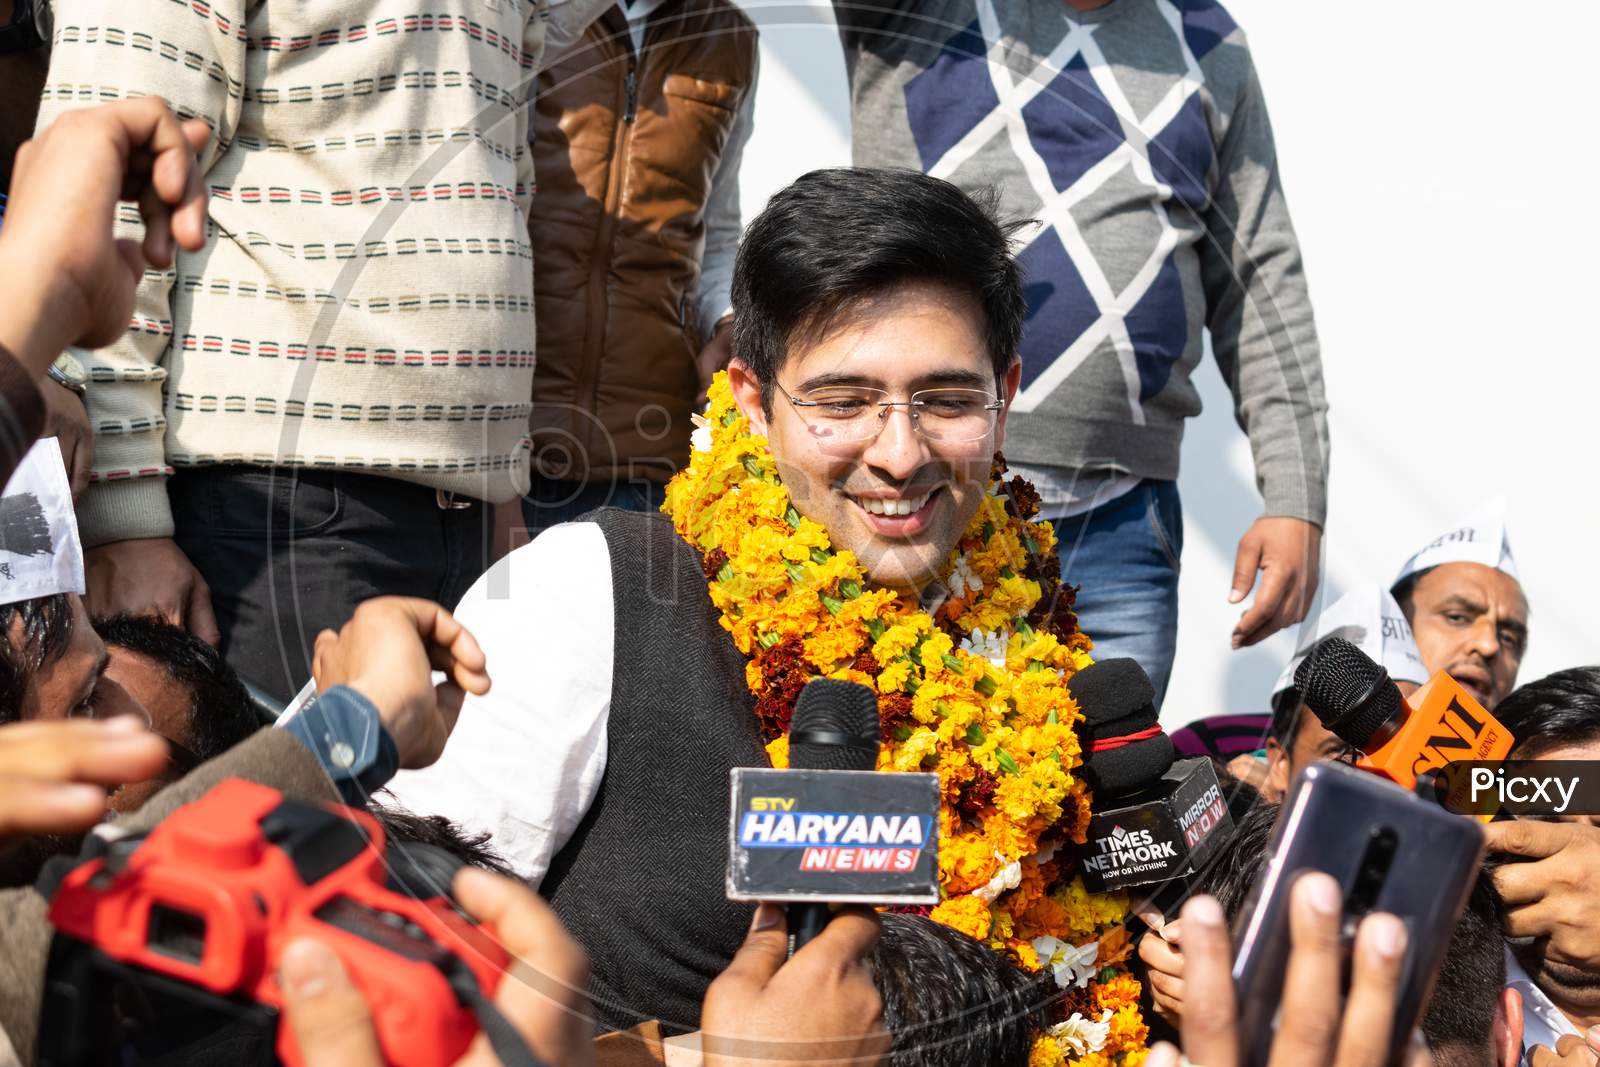 Raghav Chadha, Aam Aadmi Party AAP MLA, 7th Legislative Assembly, Delhi, Celebrating after victory in Delhi Assembly Election 2020